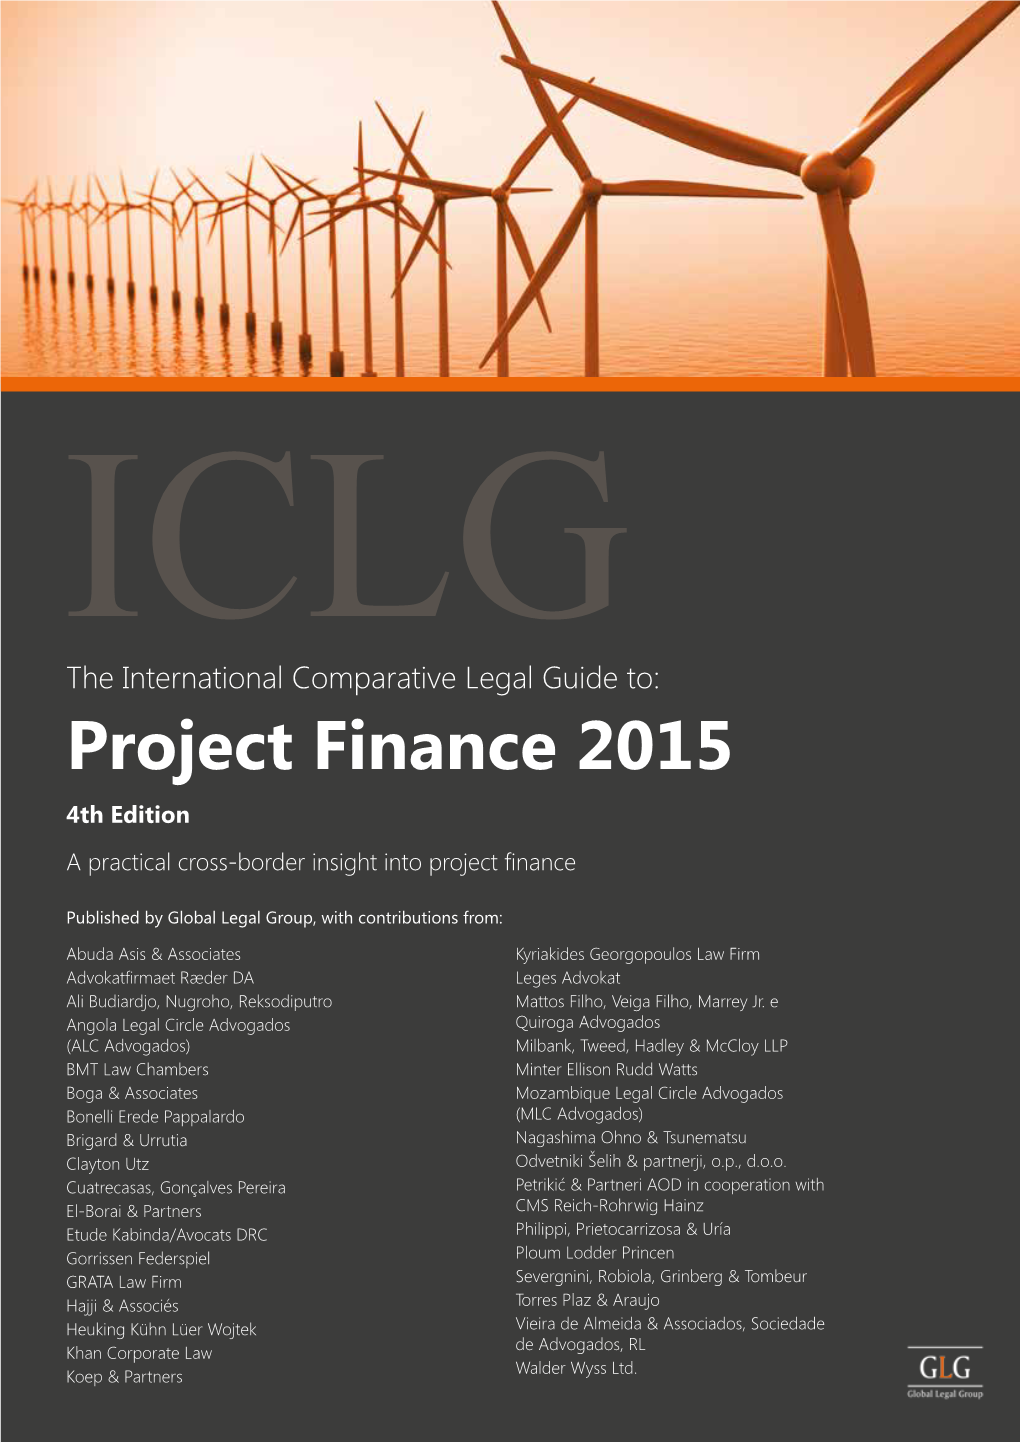 The International Comparative Legal Guide To: Project Finance 2015 4Th Edition a Practical Cross-Border Insight Into Project Finance